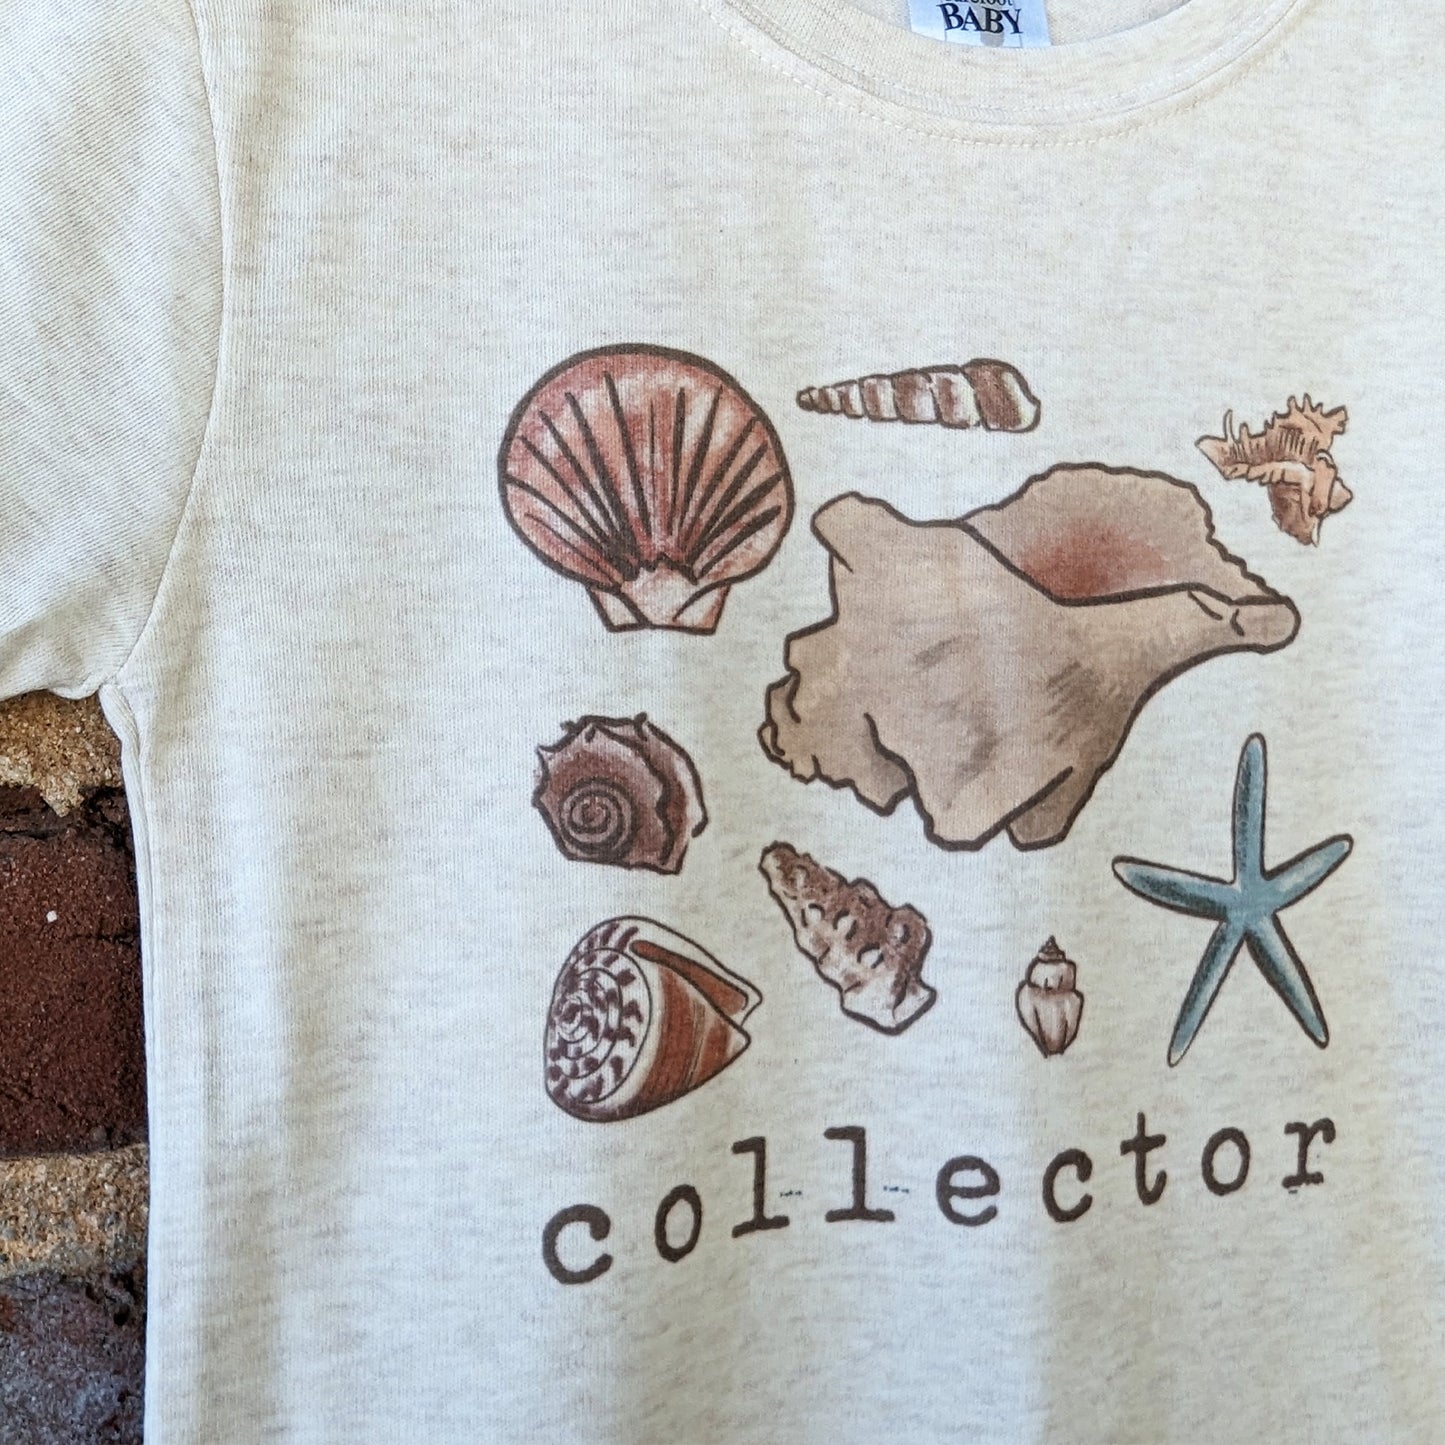 Shell "Collector" Ocean Beach Tee for Toddler or Youth